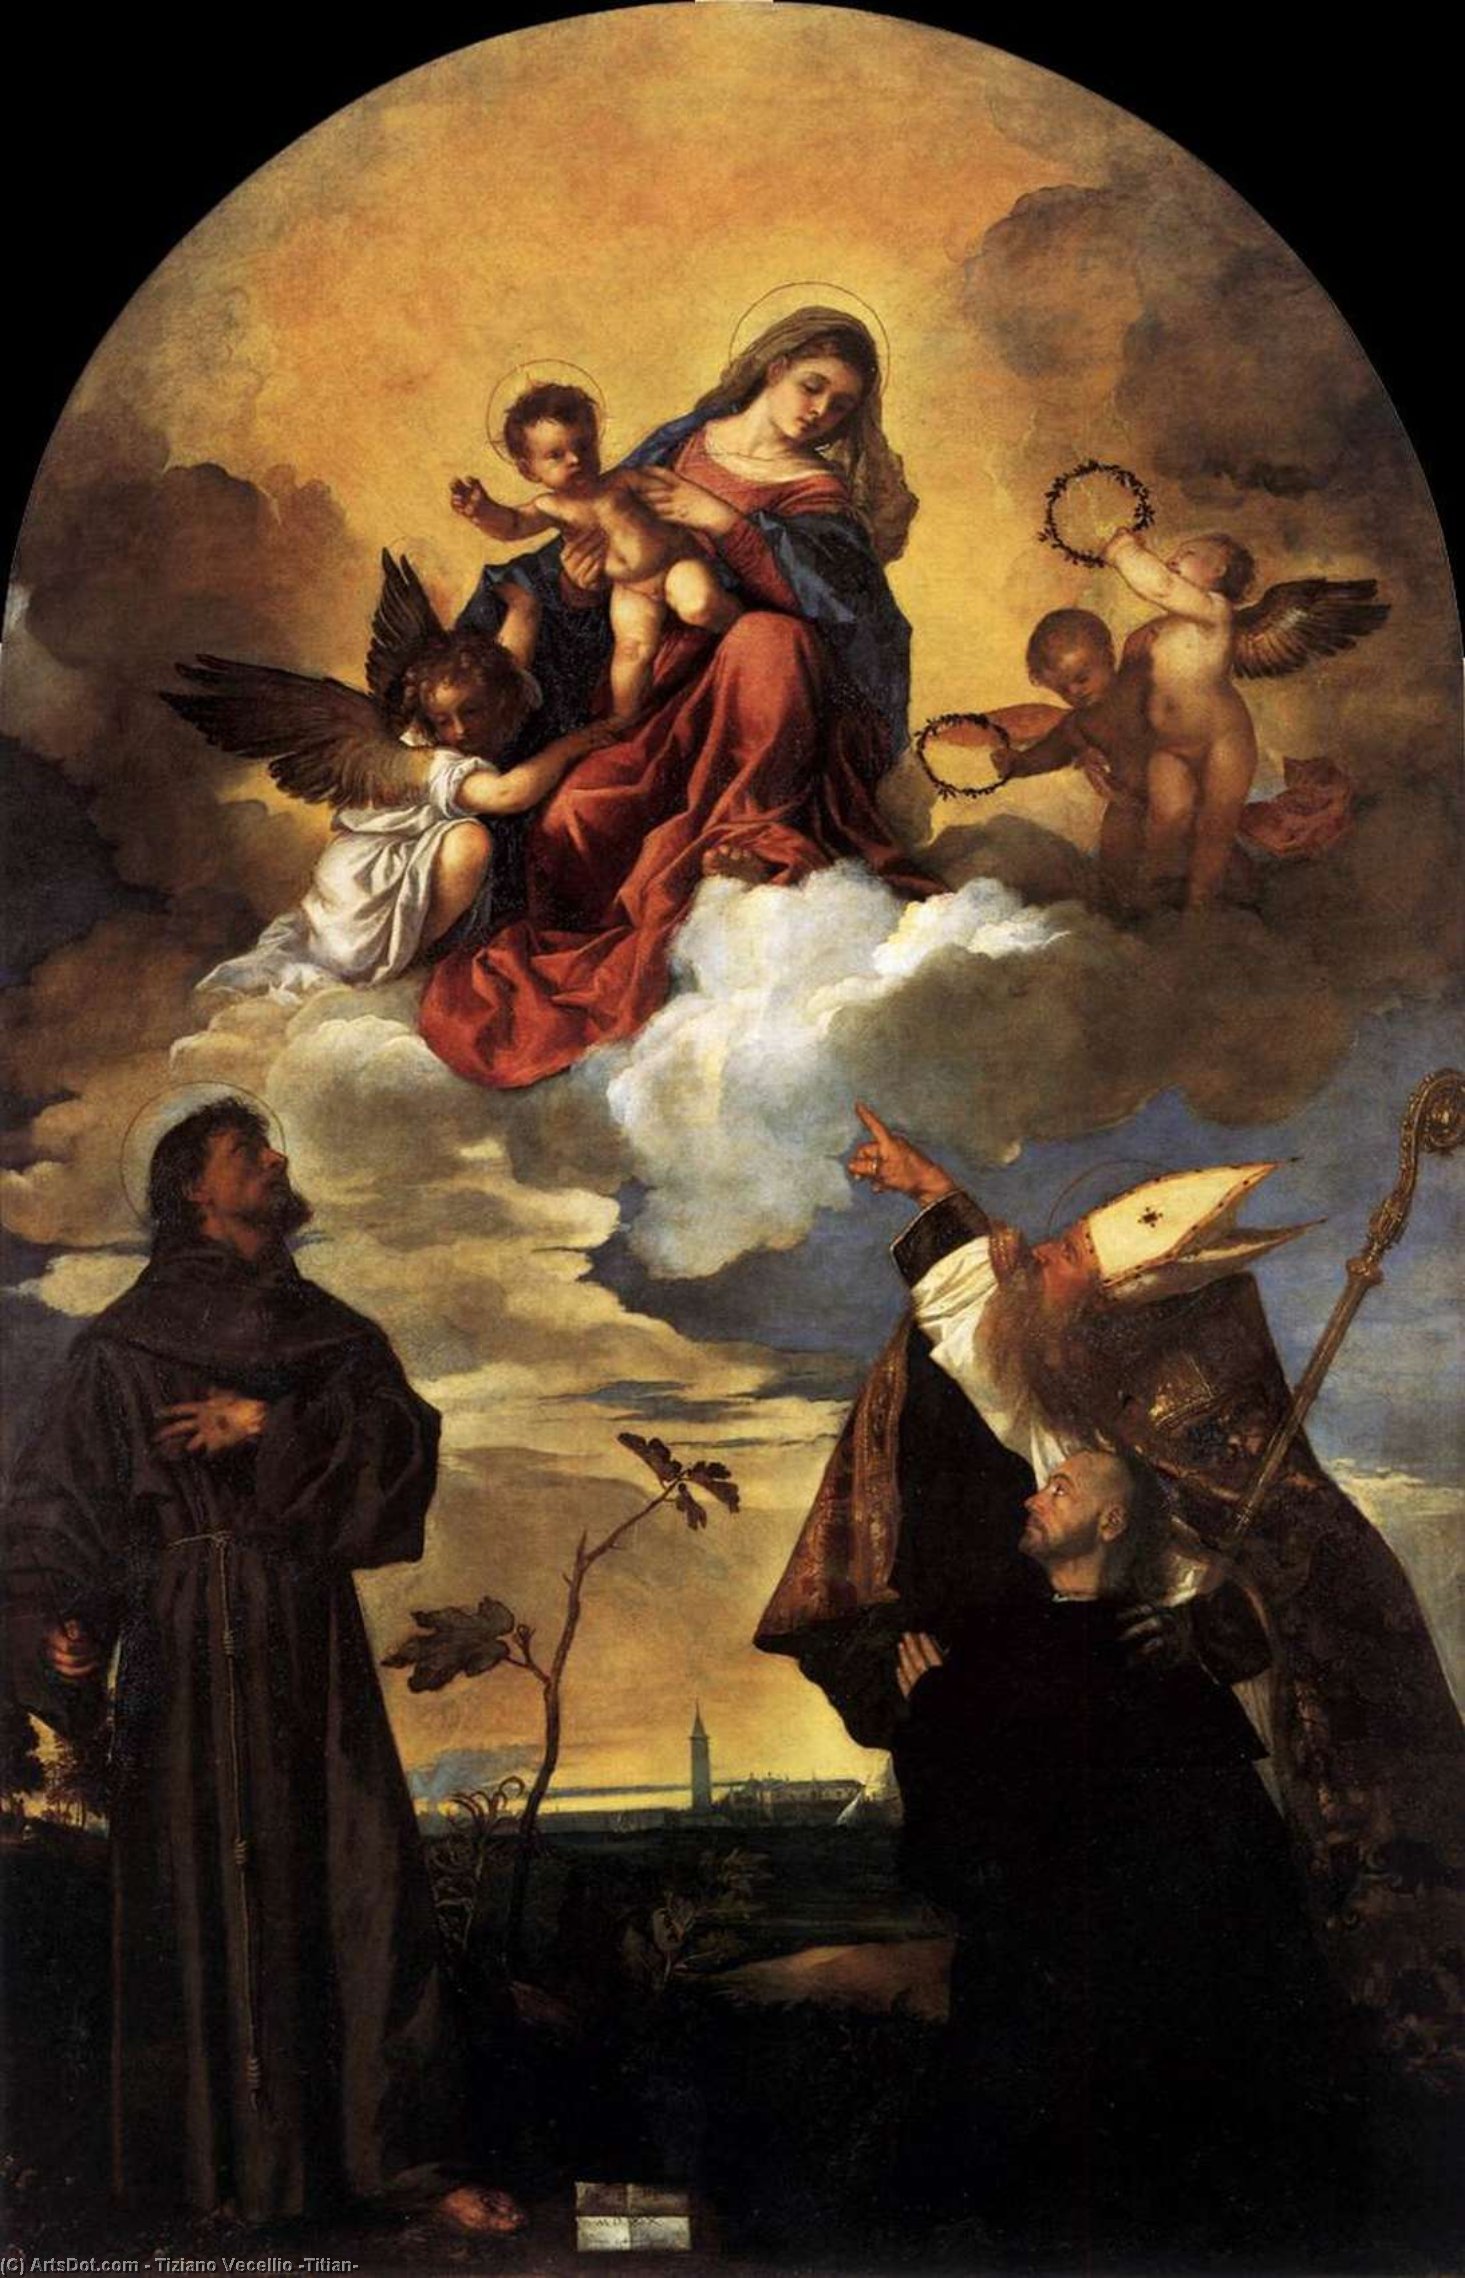 WikiOO.org - Güzel Sanatlar Ansiklopedisi - Resim, Resimler Tiziano Vecellio (Titian) - Madonna in Glory with the Christ Child and Sts Francis and Alvise with the Donor